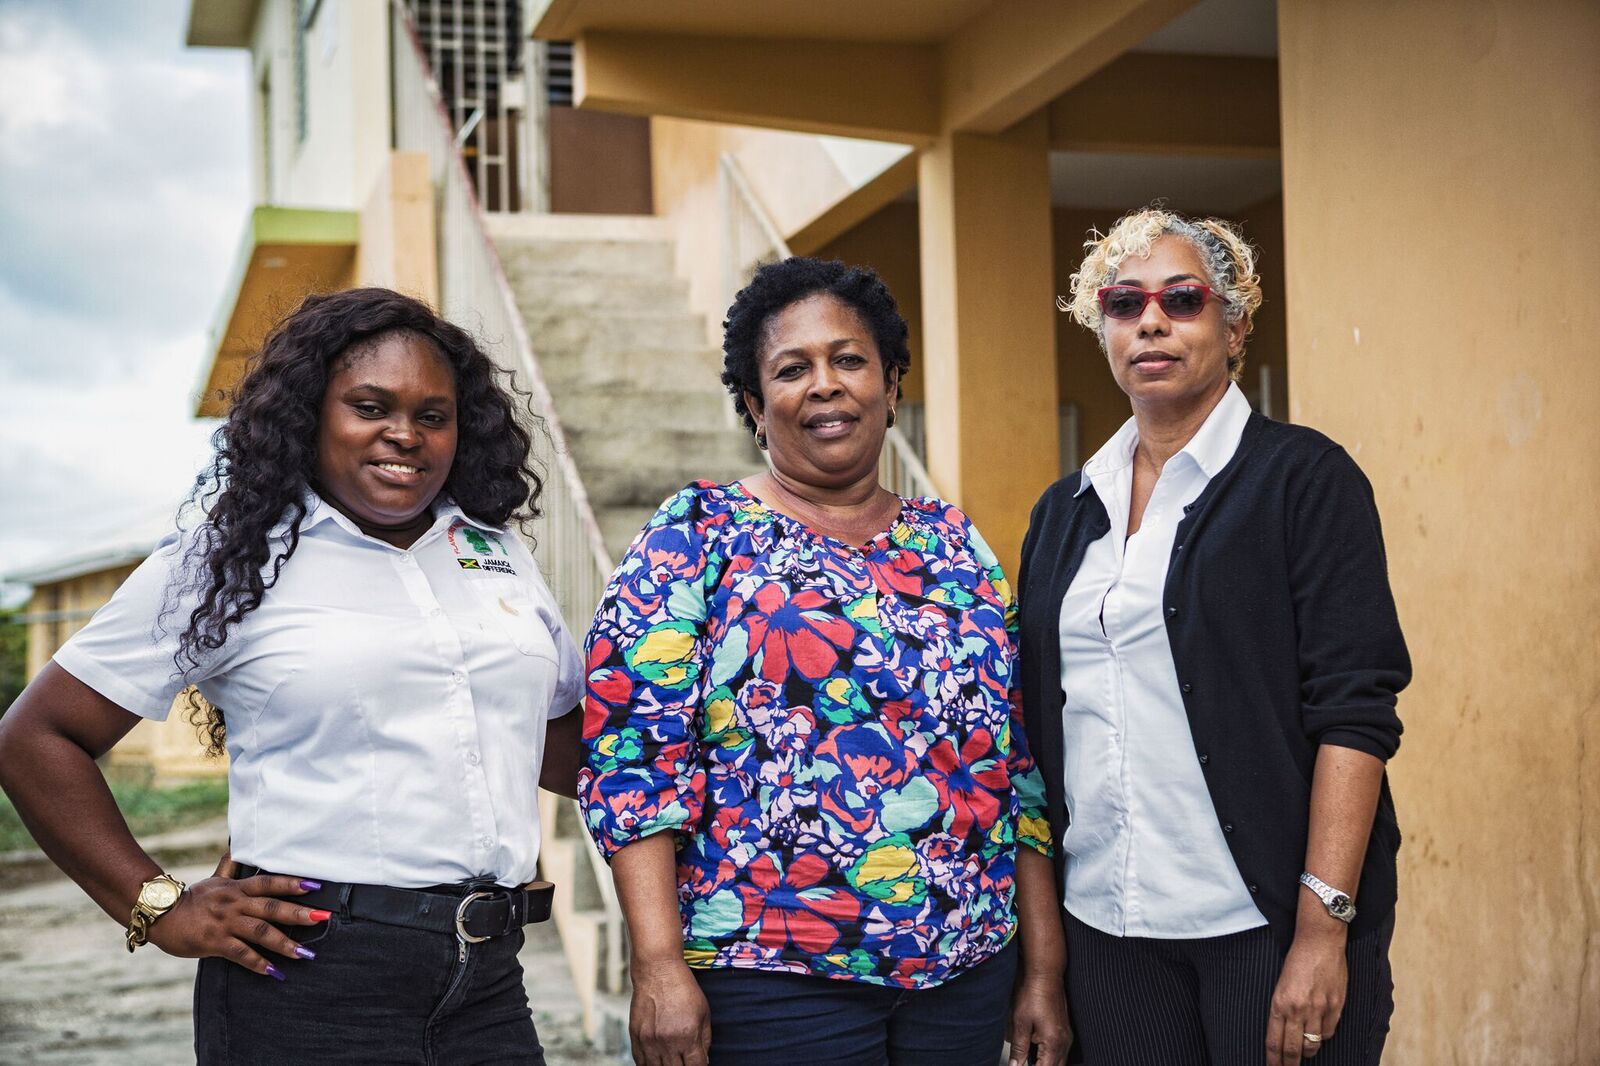 A View Into The Sandals Foundation's Flanker Resource Center